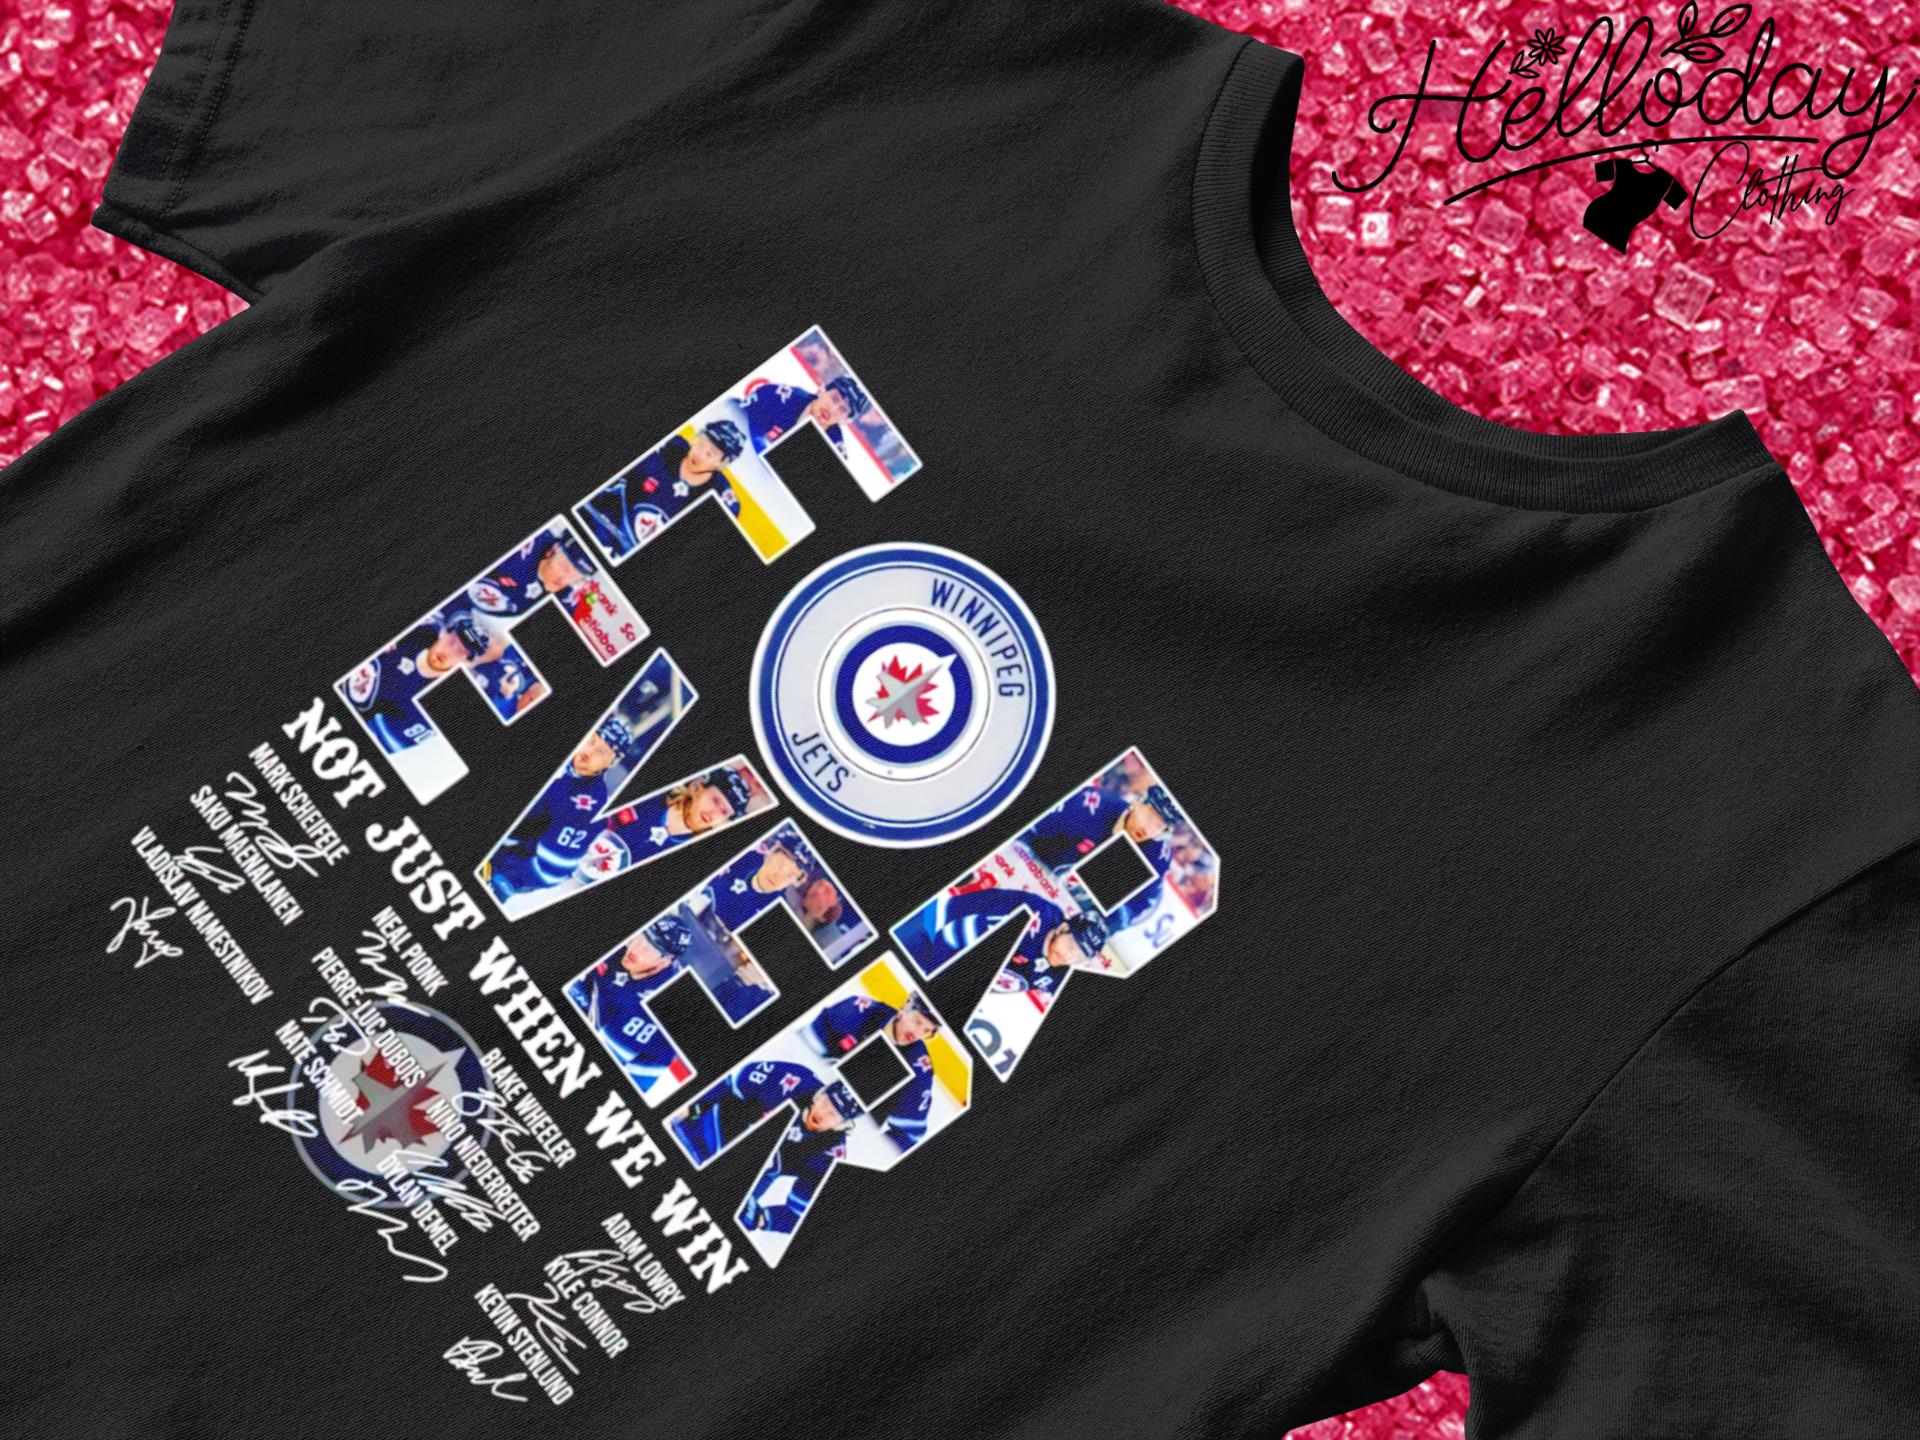 Winnipeg Jets forever not just when we win signatures shirt